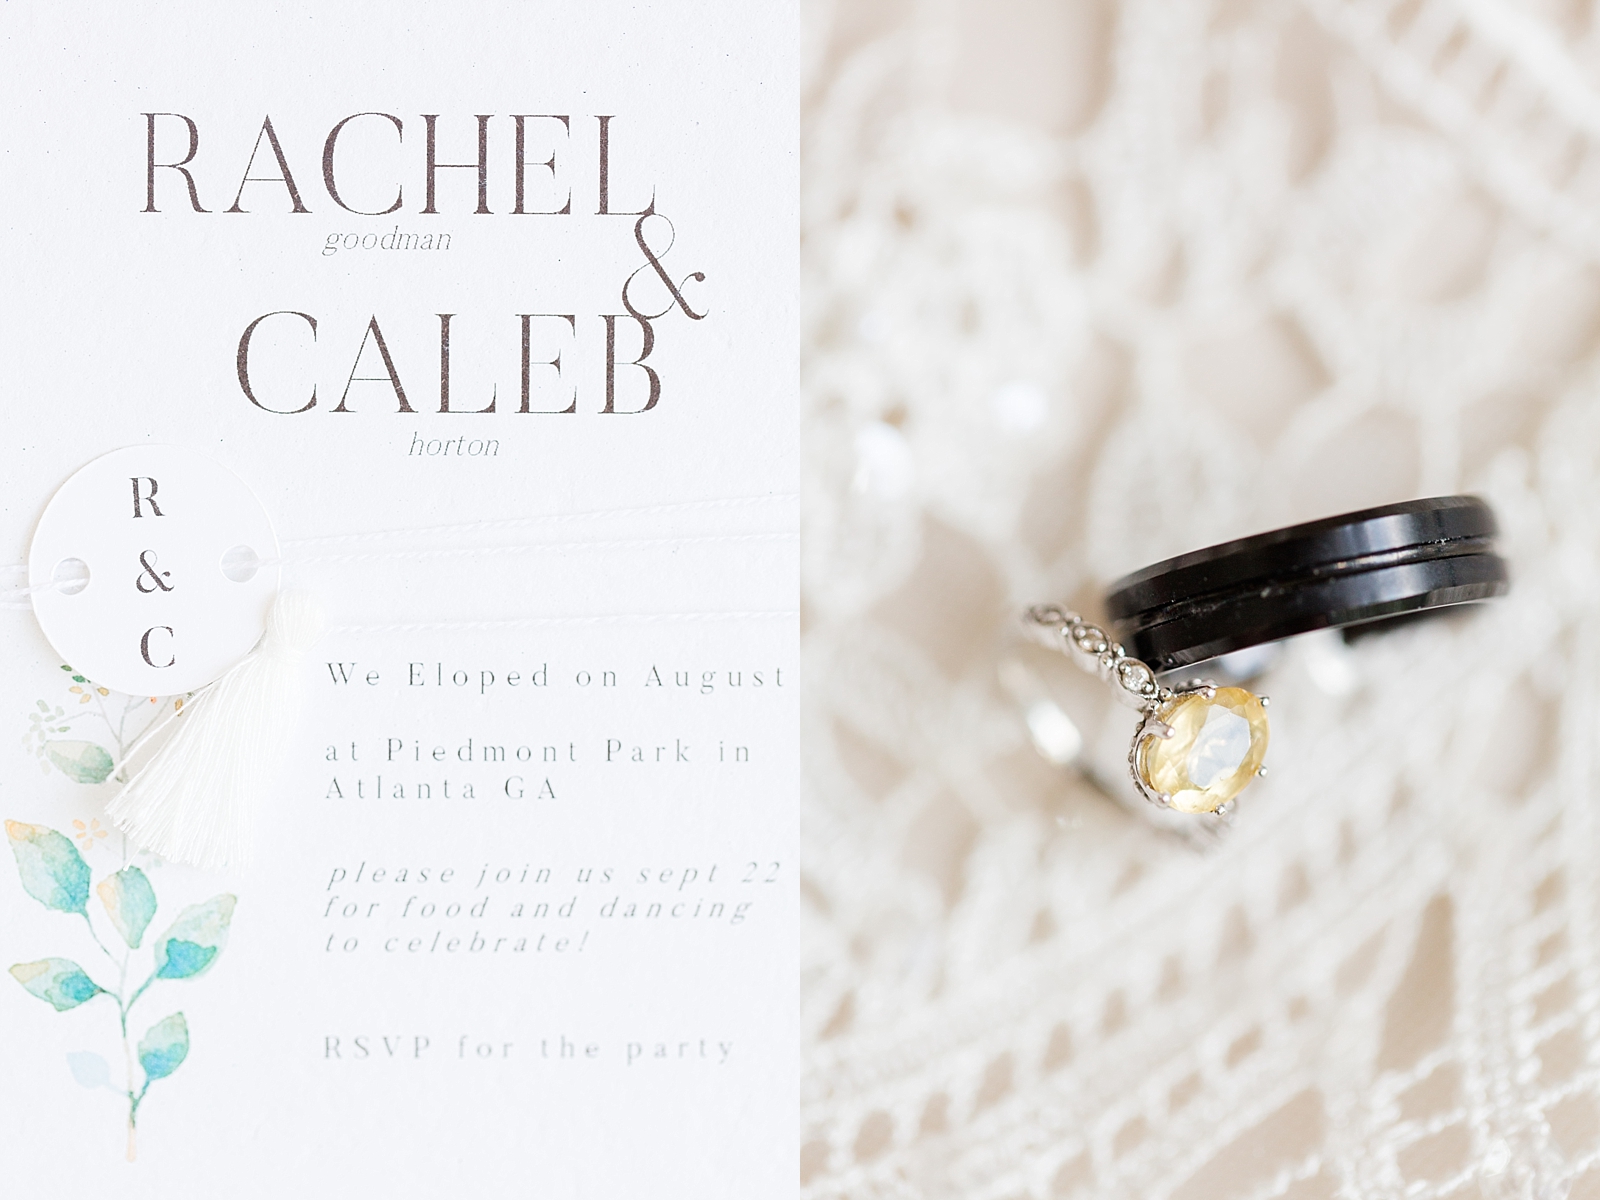 Atlanta Georgia Elopement detail of invitation and wedding rings on lace dress Photos